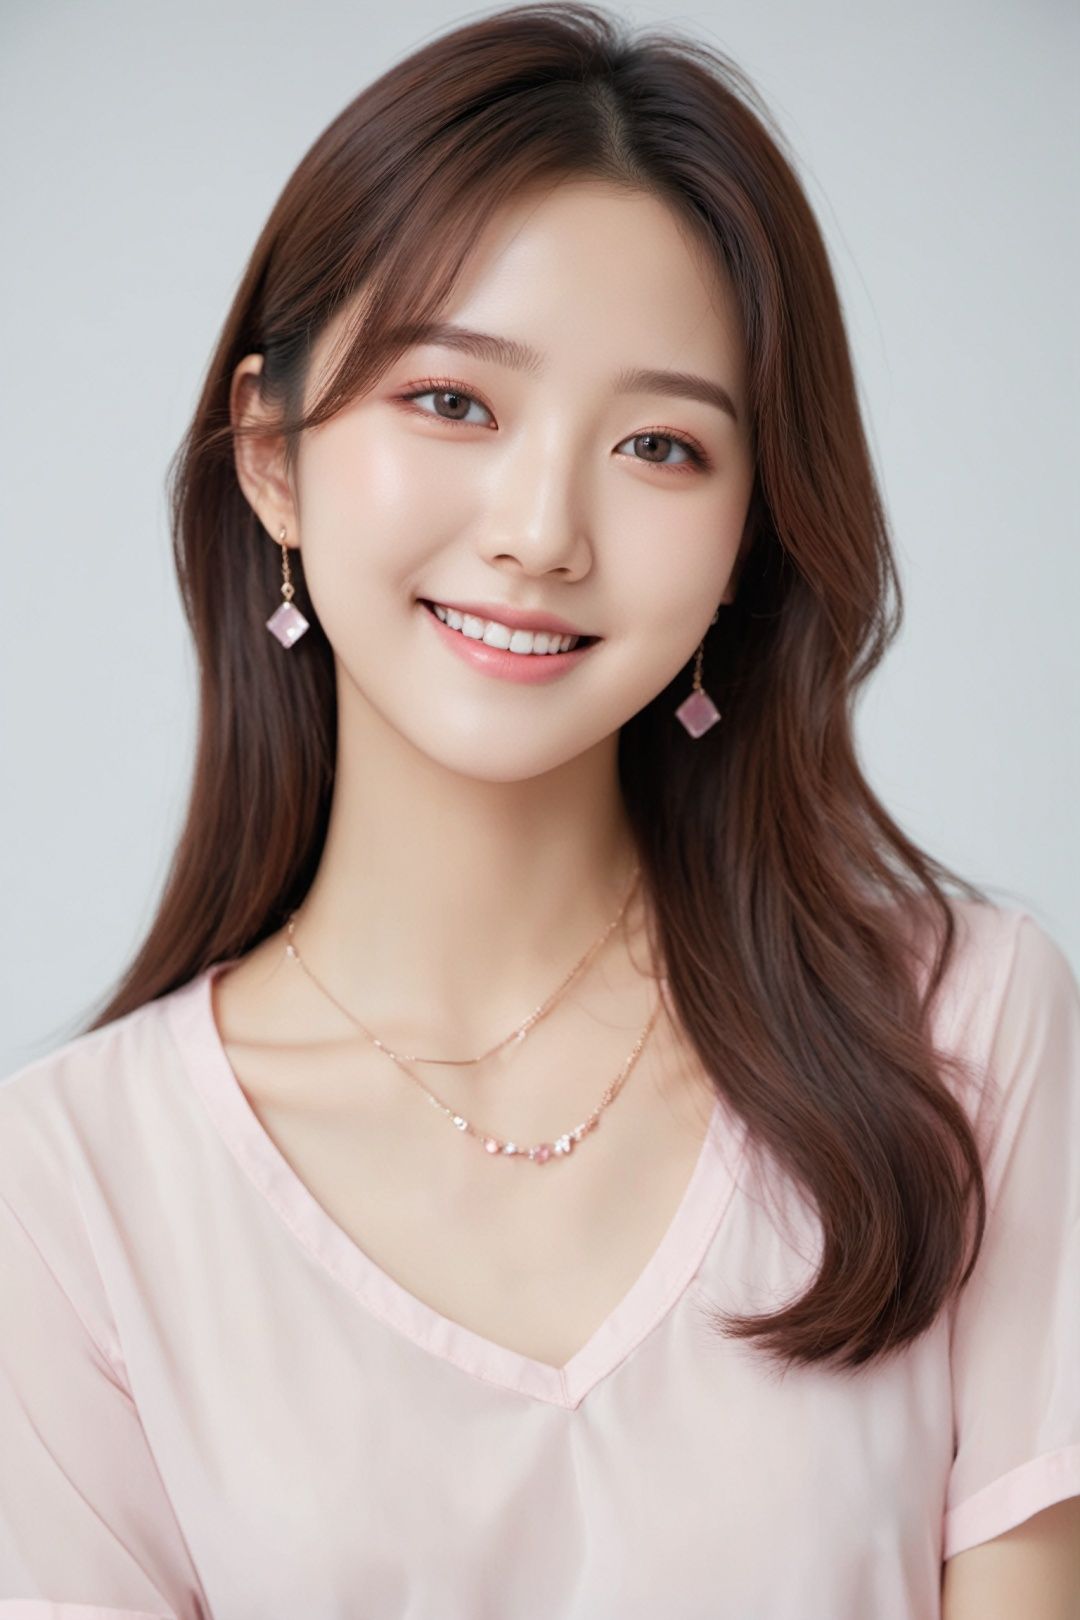 Realistic,korean girl portrait,upper body,long straight brown hair,black eyes,indoors,white background,wearing a pastel pink shirt,minimal jewelry,gentle smile,soft makeup focusing on aegyo sal,pure and youthful,